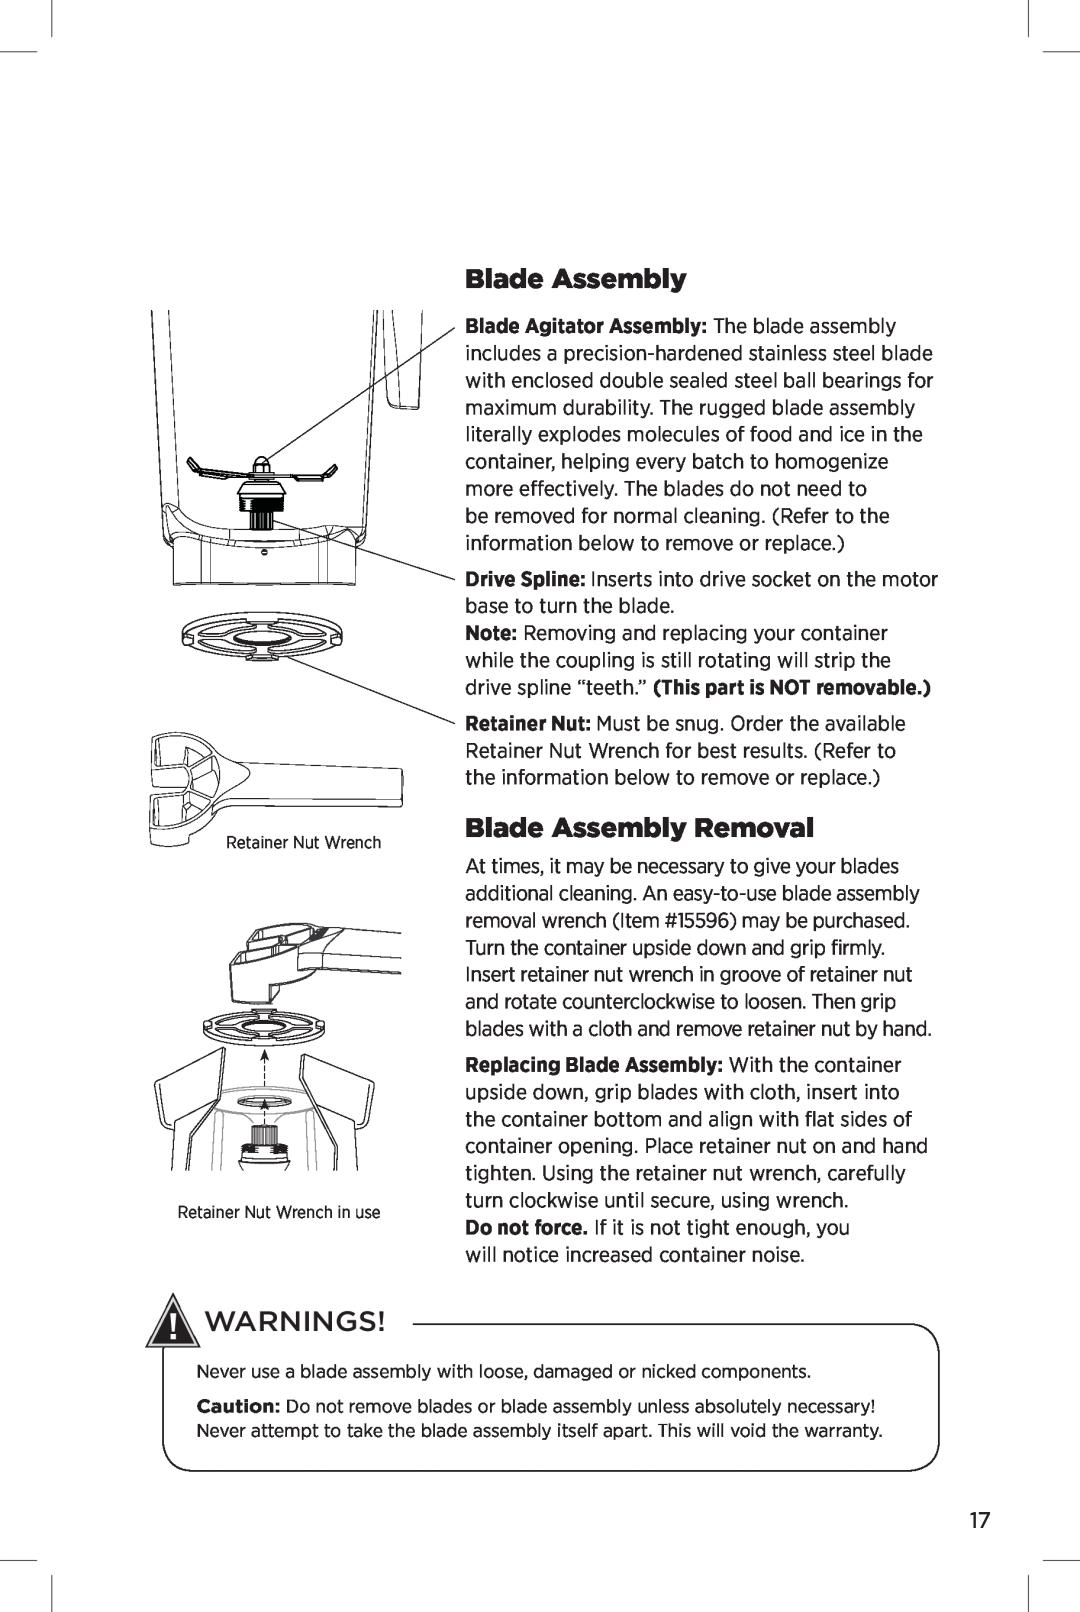 Vita-Mix The Quiet One manual Blade Assembly Removal, Warnings 